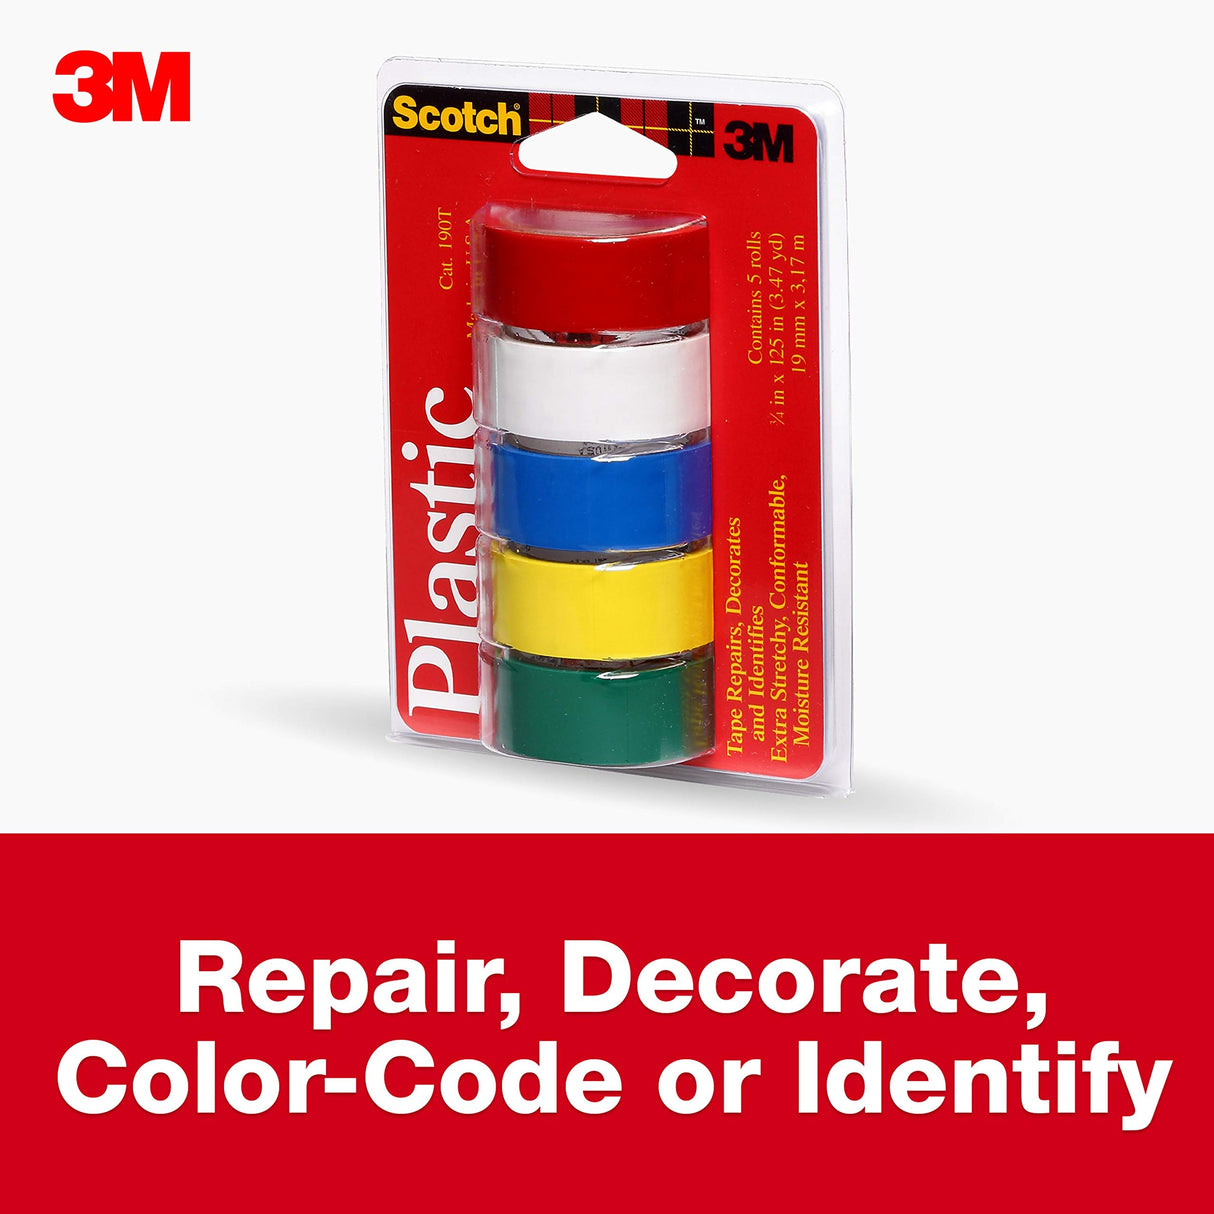 Scotch Colored Plastic Tape, 3/4 inches by 125 inches, Multi-Pack Red, White, Blue, Yellow & Green, 5 Rolls